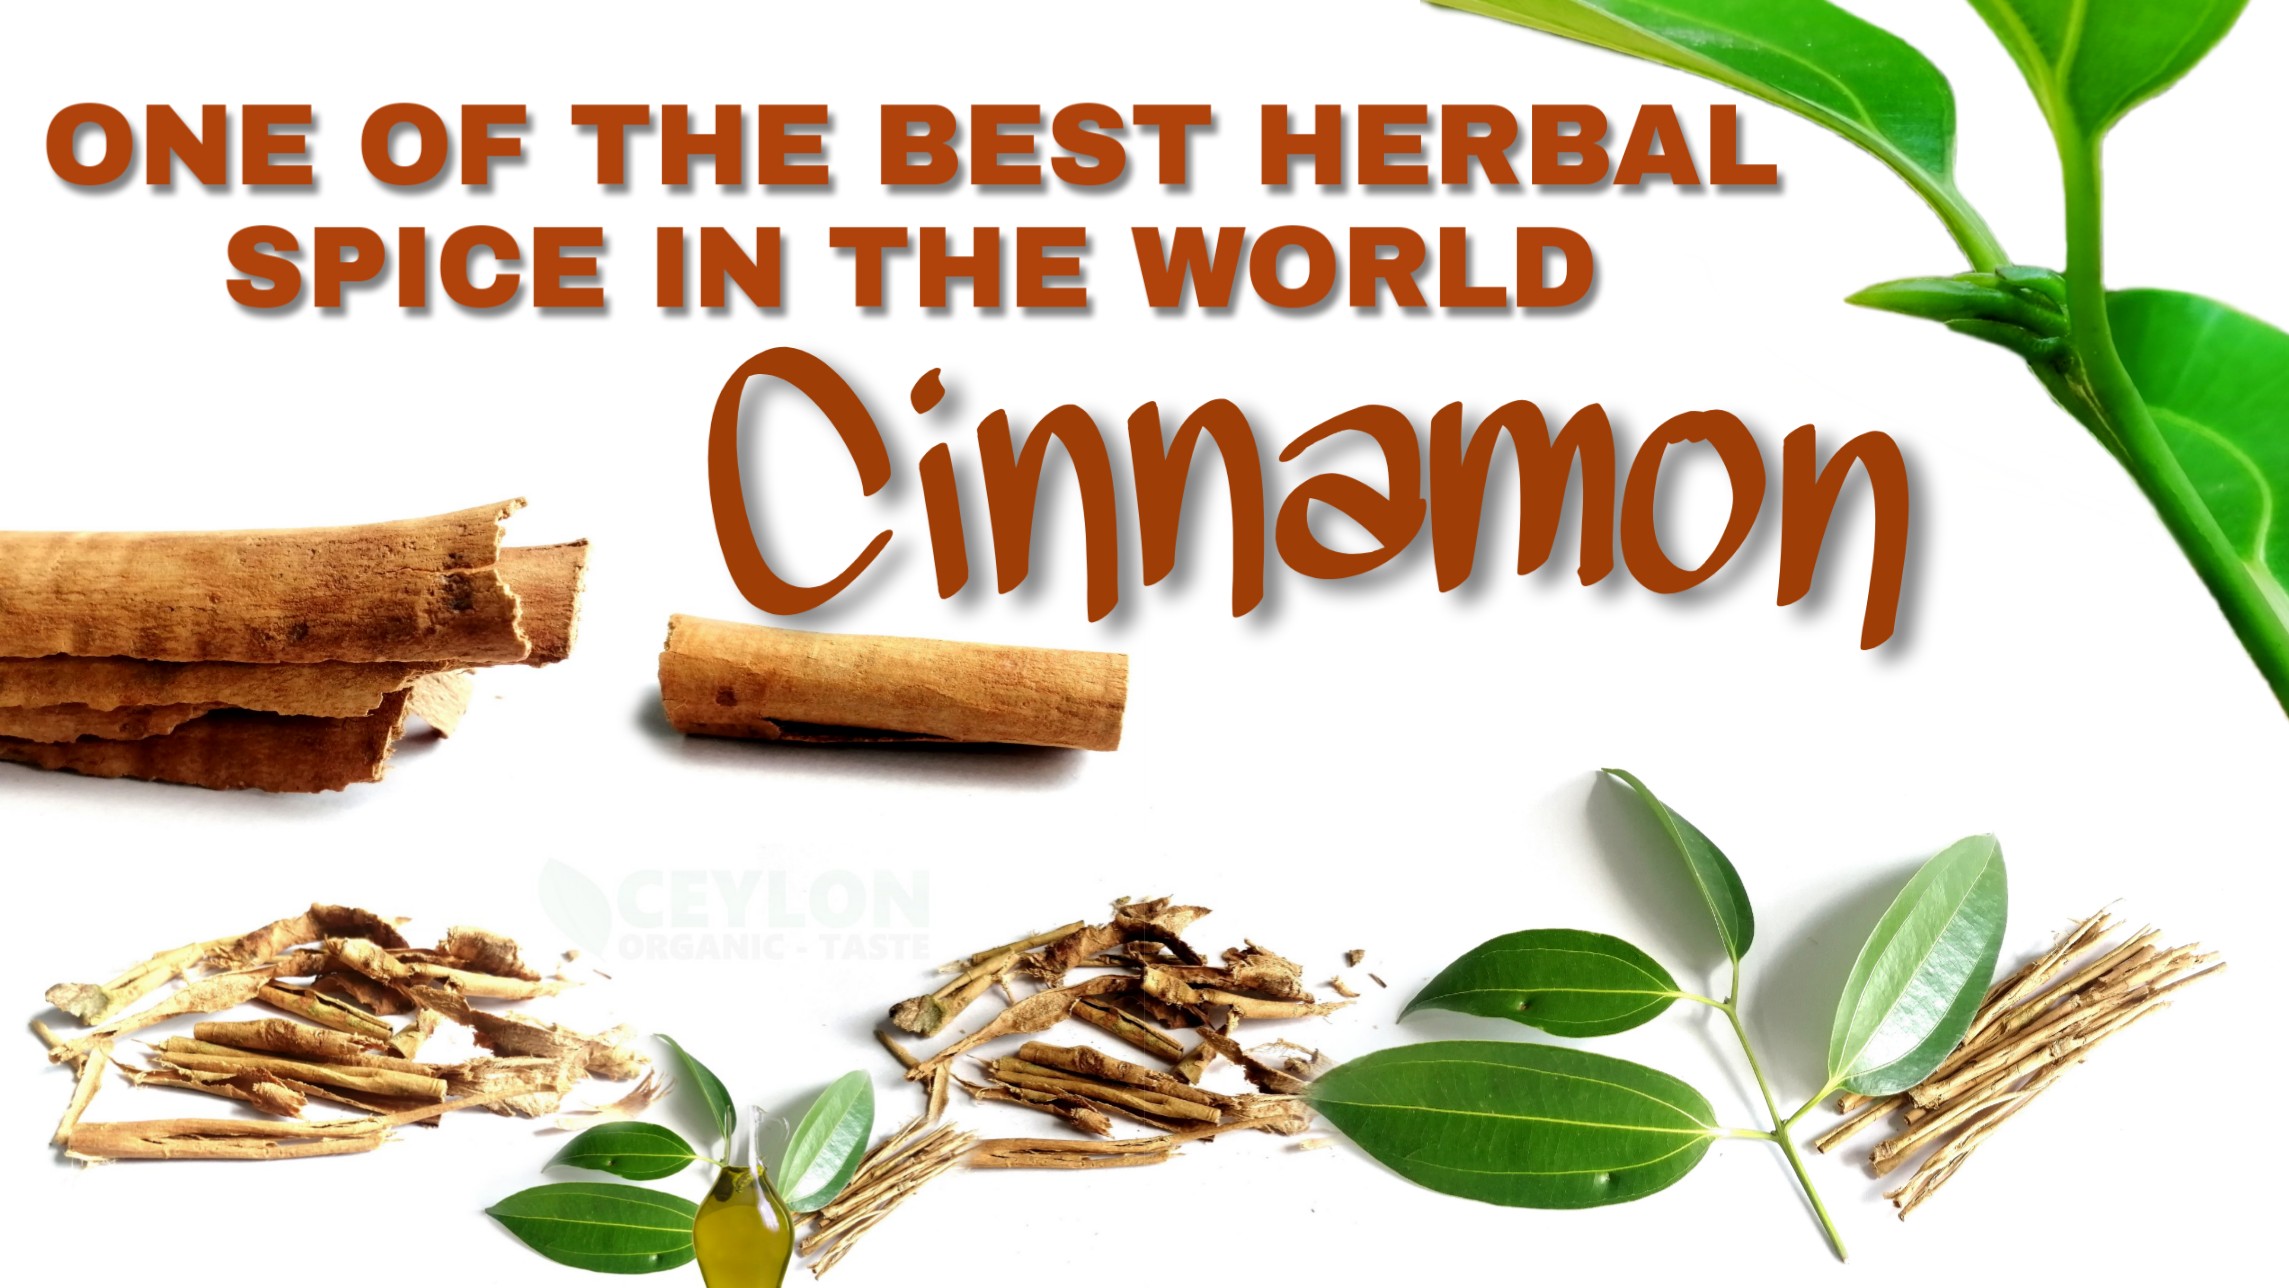 Cinnamon – One of the best herbal spice in the world